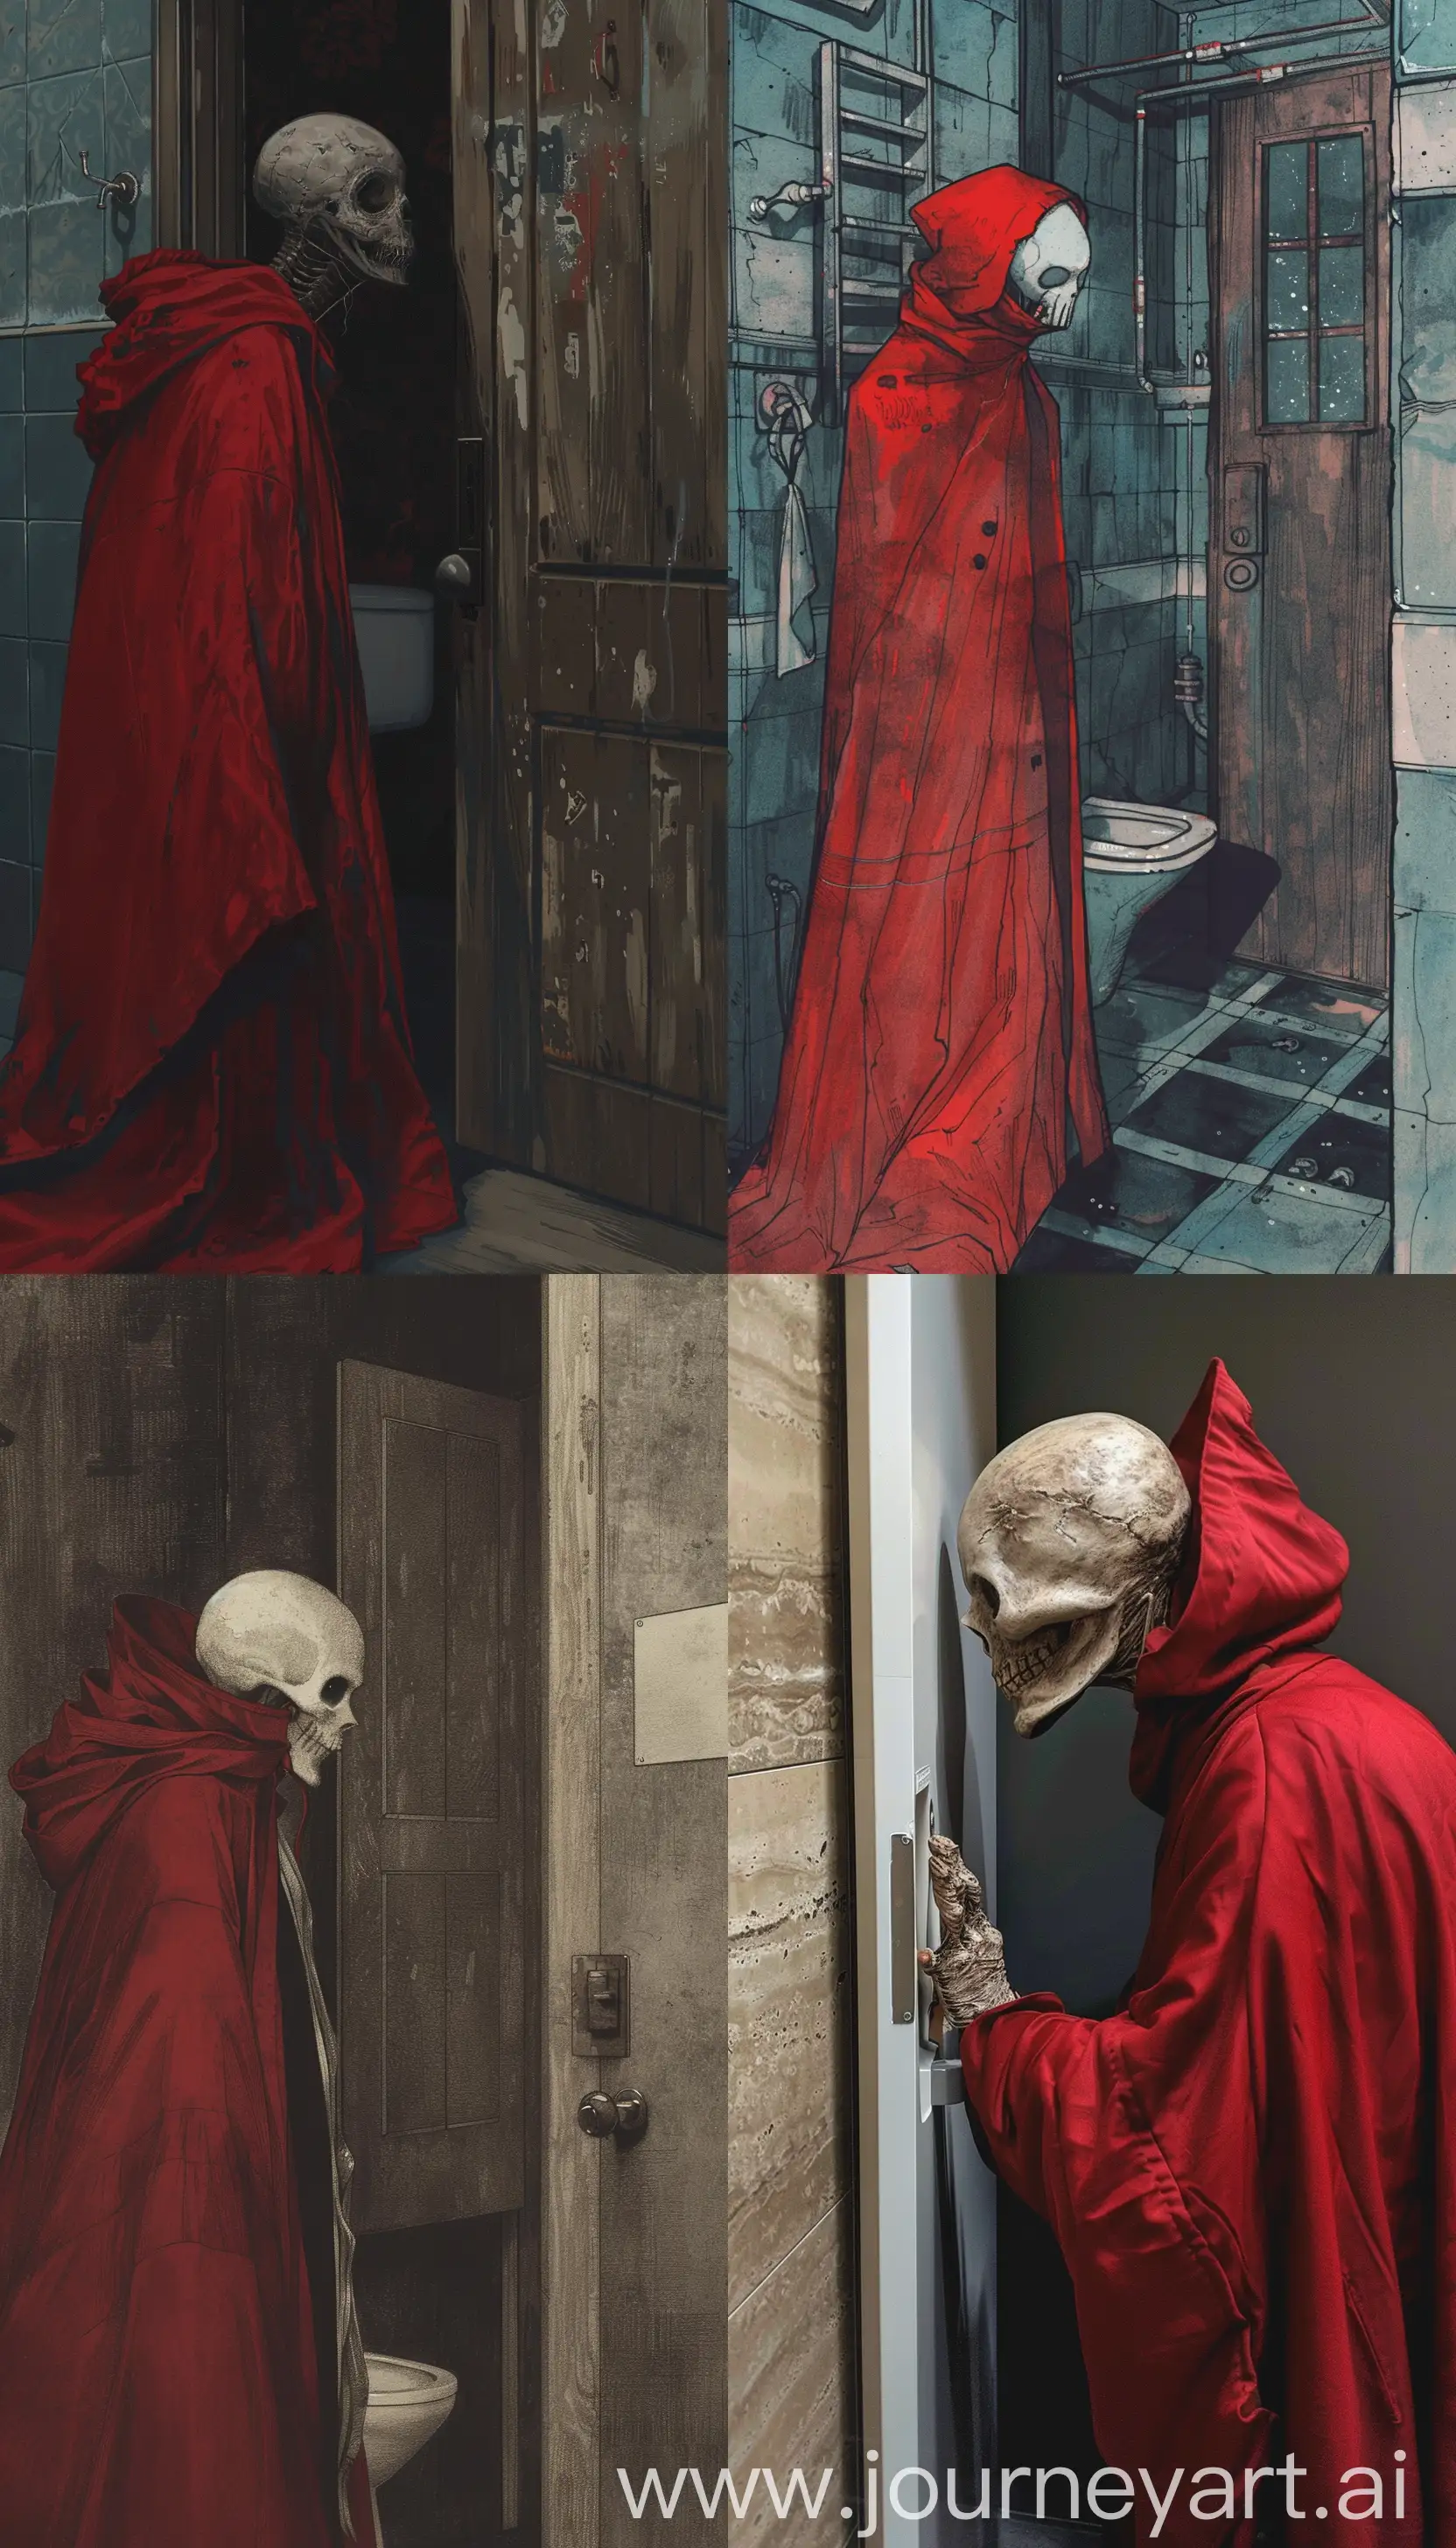 Akamanto, a macabre and strange character from Japanese legend, wearing a red cloak and looking at the door of a bathroom --ar 4:7 --v 6